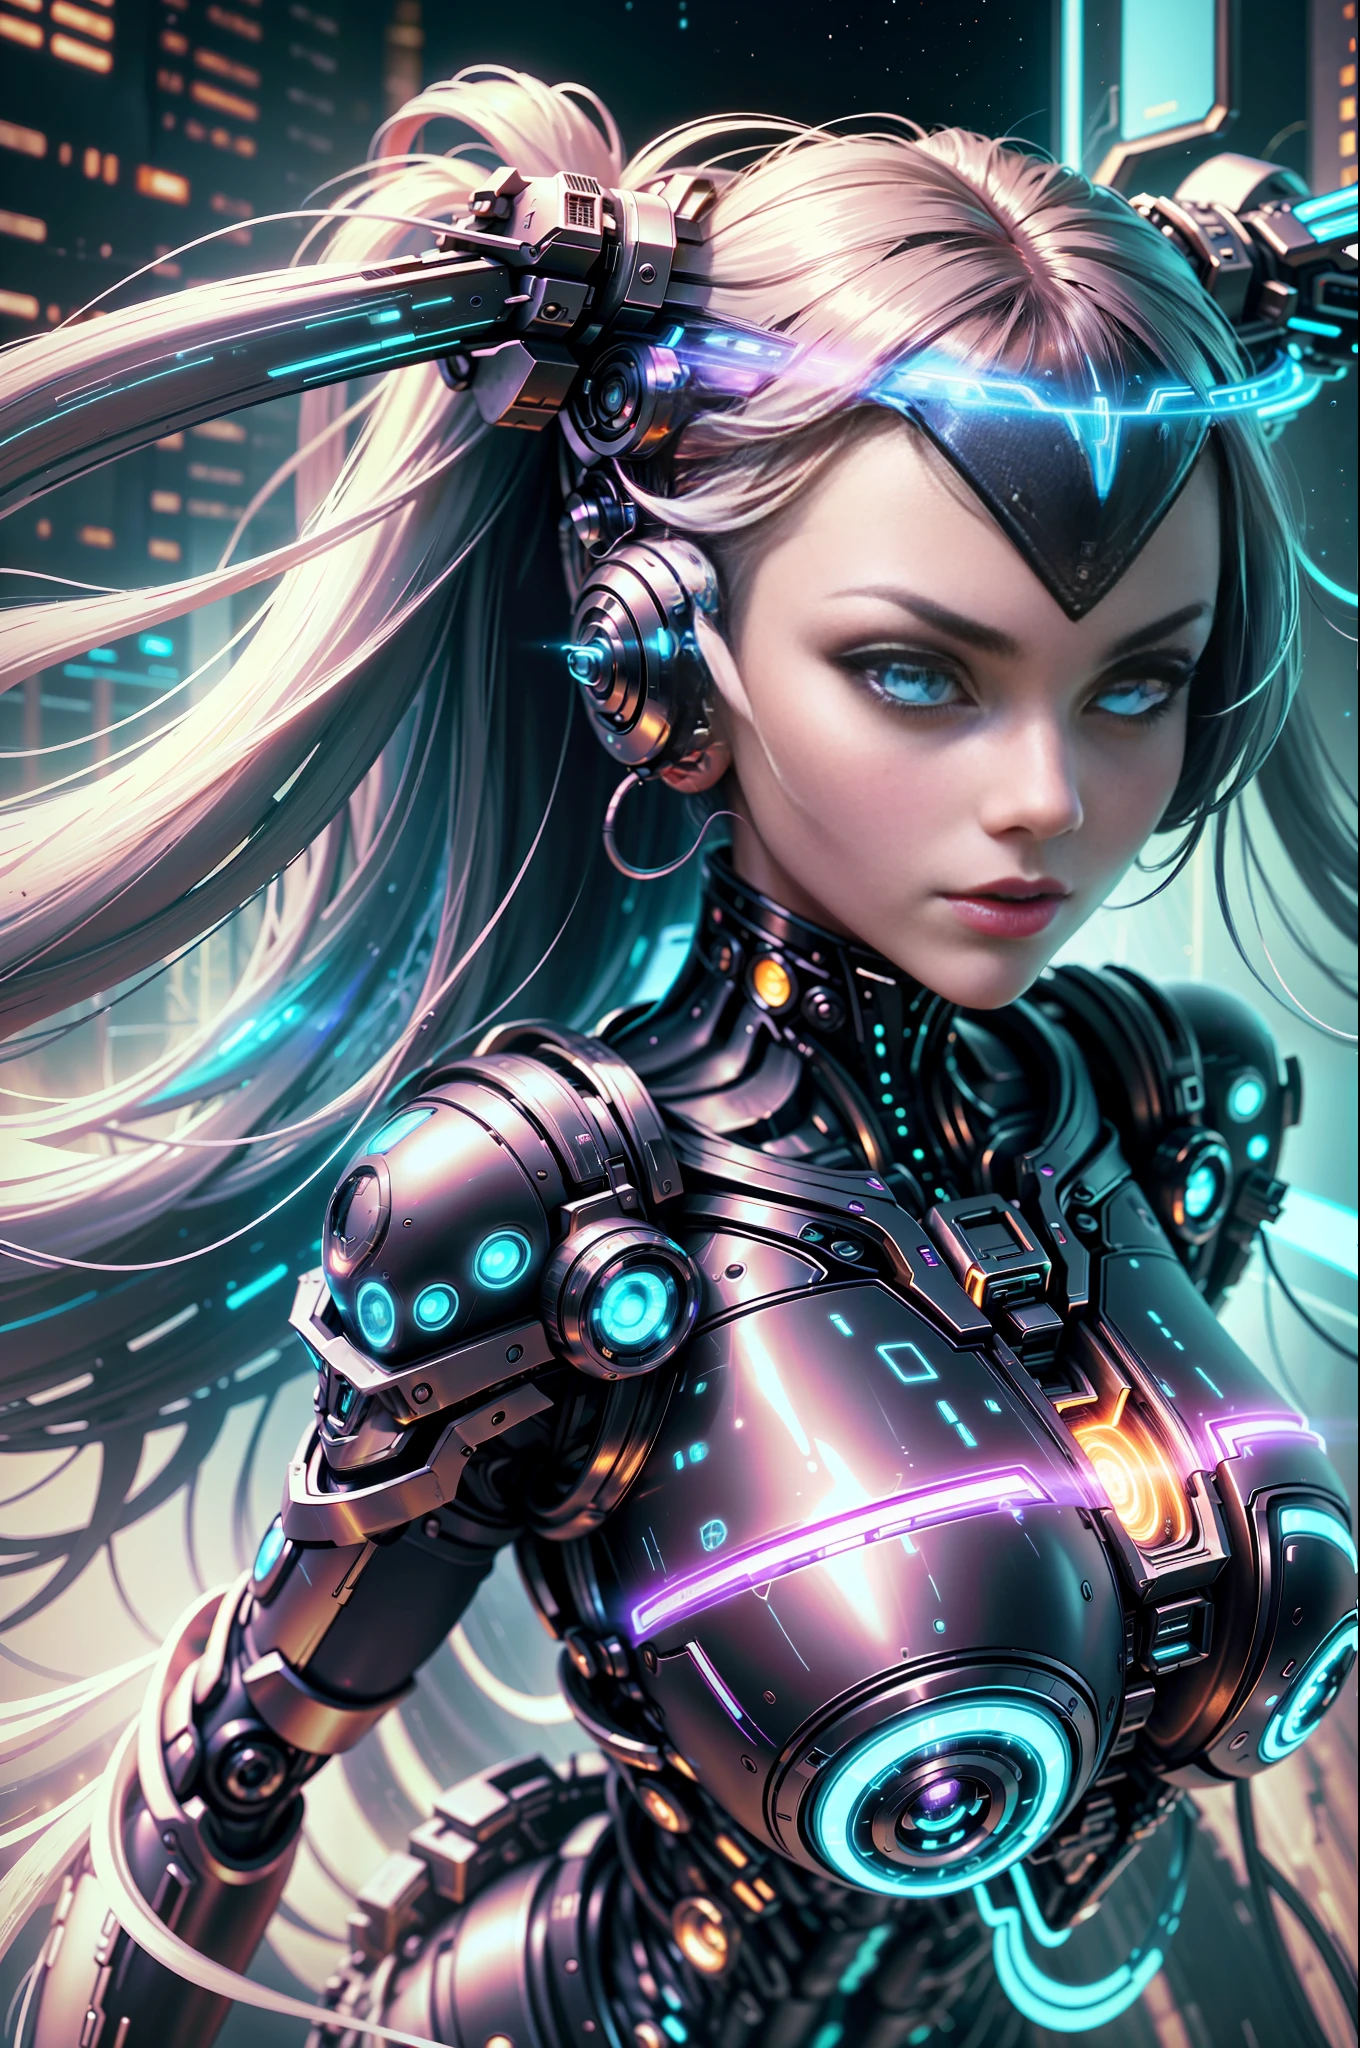 A cybernetic woman with electric eyes, burning metallic hair, iridescent skin with circuited patterns, nails sharp as claws, and a mysterious look. The neon light of the environment reflects on its metallic curves as it rises majestically over a futuristic landscape filled with glittering skyscrapers, bustling streets and flying vehicles. The city is illuminated by a starry sky and a full moon, which add a touch of cosmic charm. The cybernetic woman emanates an aura of power and mystery, evoking the sense of a technological and fascinating future. The image will be executed as a high-resolution photograph, capturing every detail of the cybernetic woman and the environment around her. The photographic style will emphasize neon lighting and metallic sheen, conveying a futuristic and technological atmosphere. The state-of-the-art camera will be used to capture the image, ensuring sharp detail and vibrant colors. --auto --s2